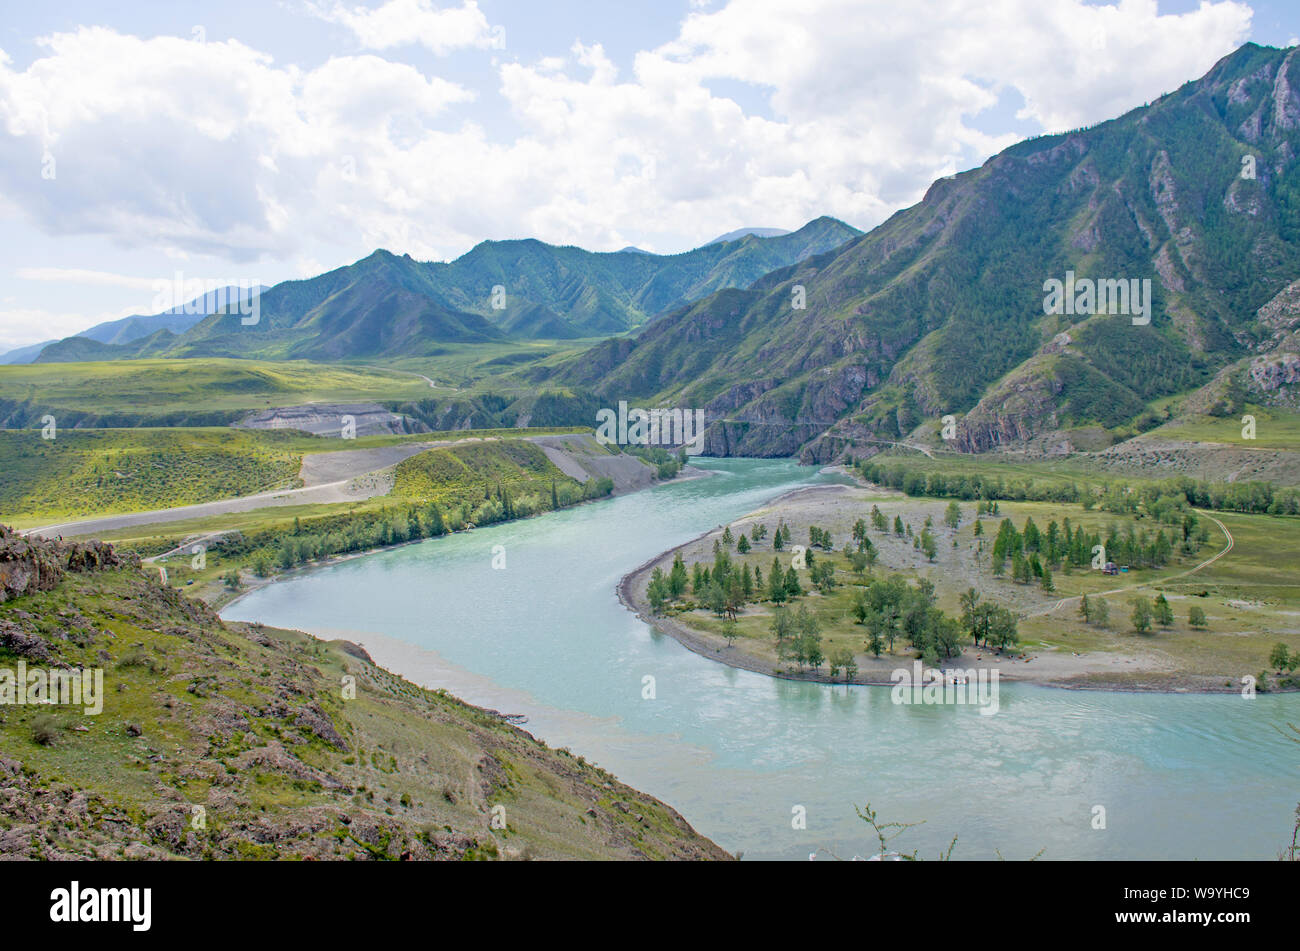 Landscape confluence of Chuya River and Katun River on Altai in Russia among mountains Stock Photo